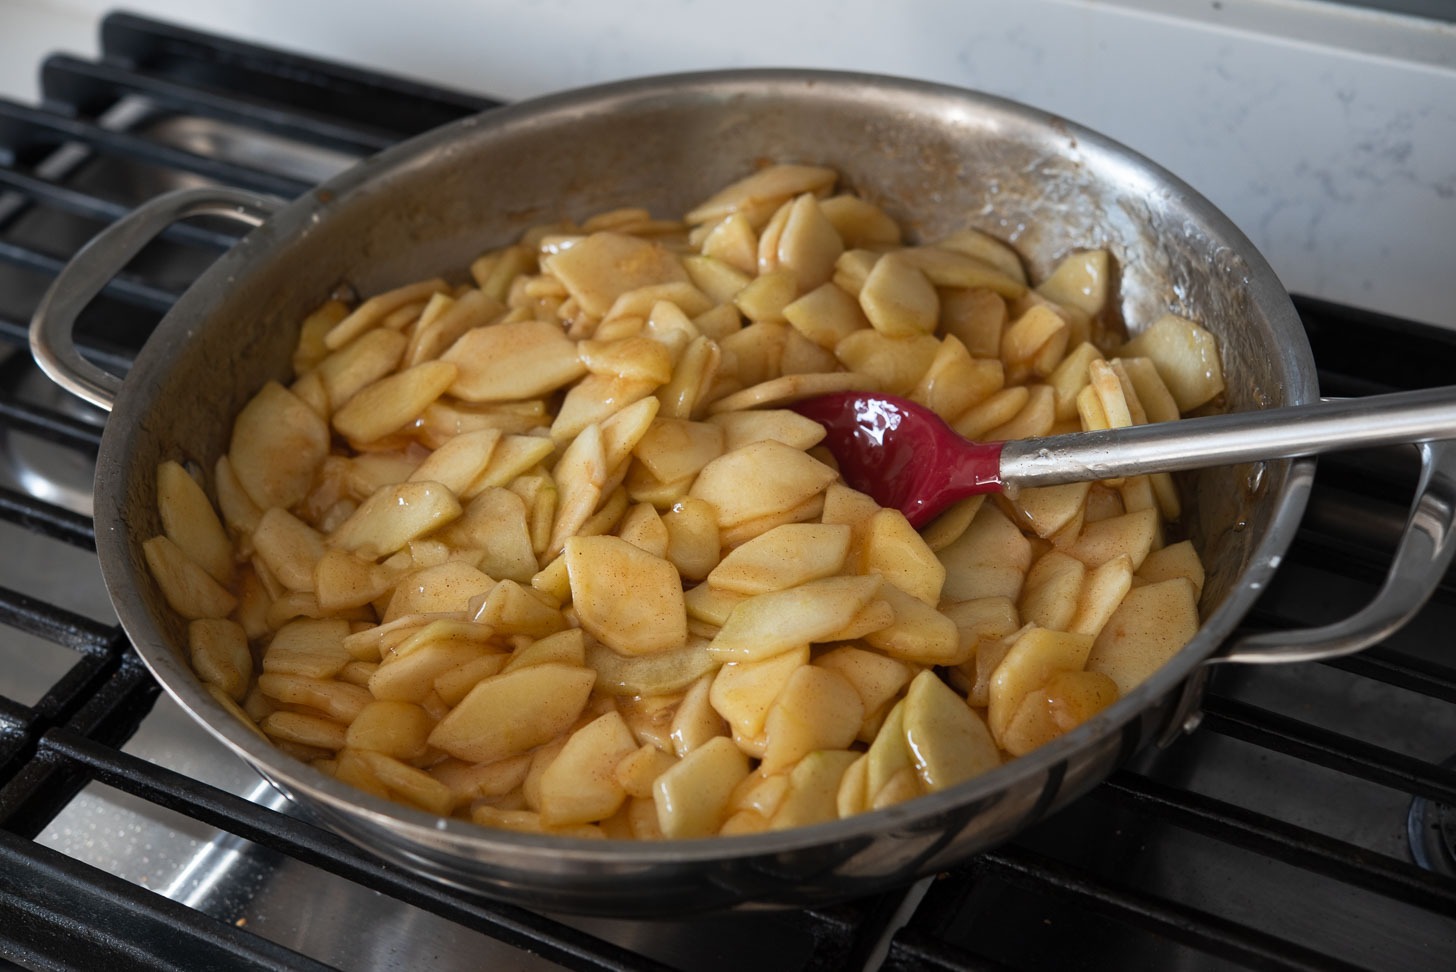 Cook apple filling until it is soft and thickened.